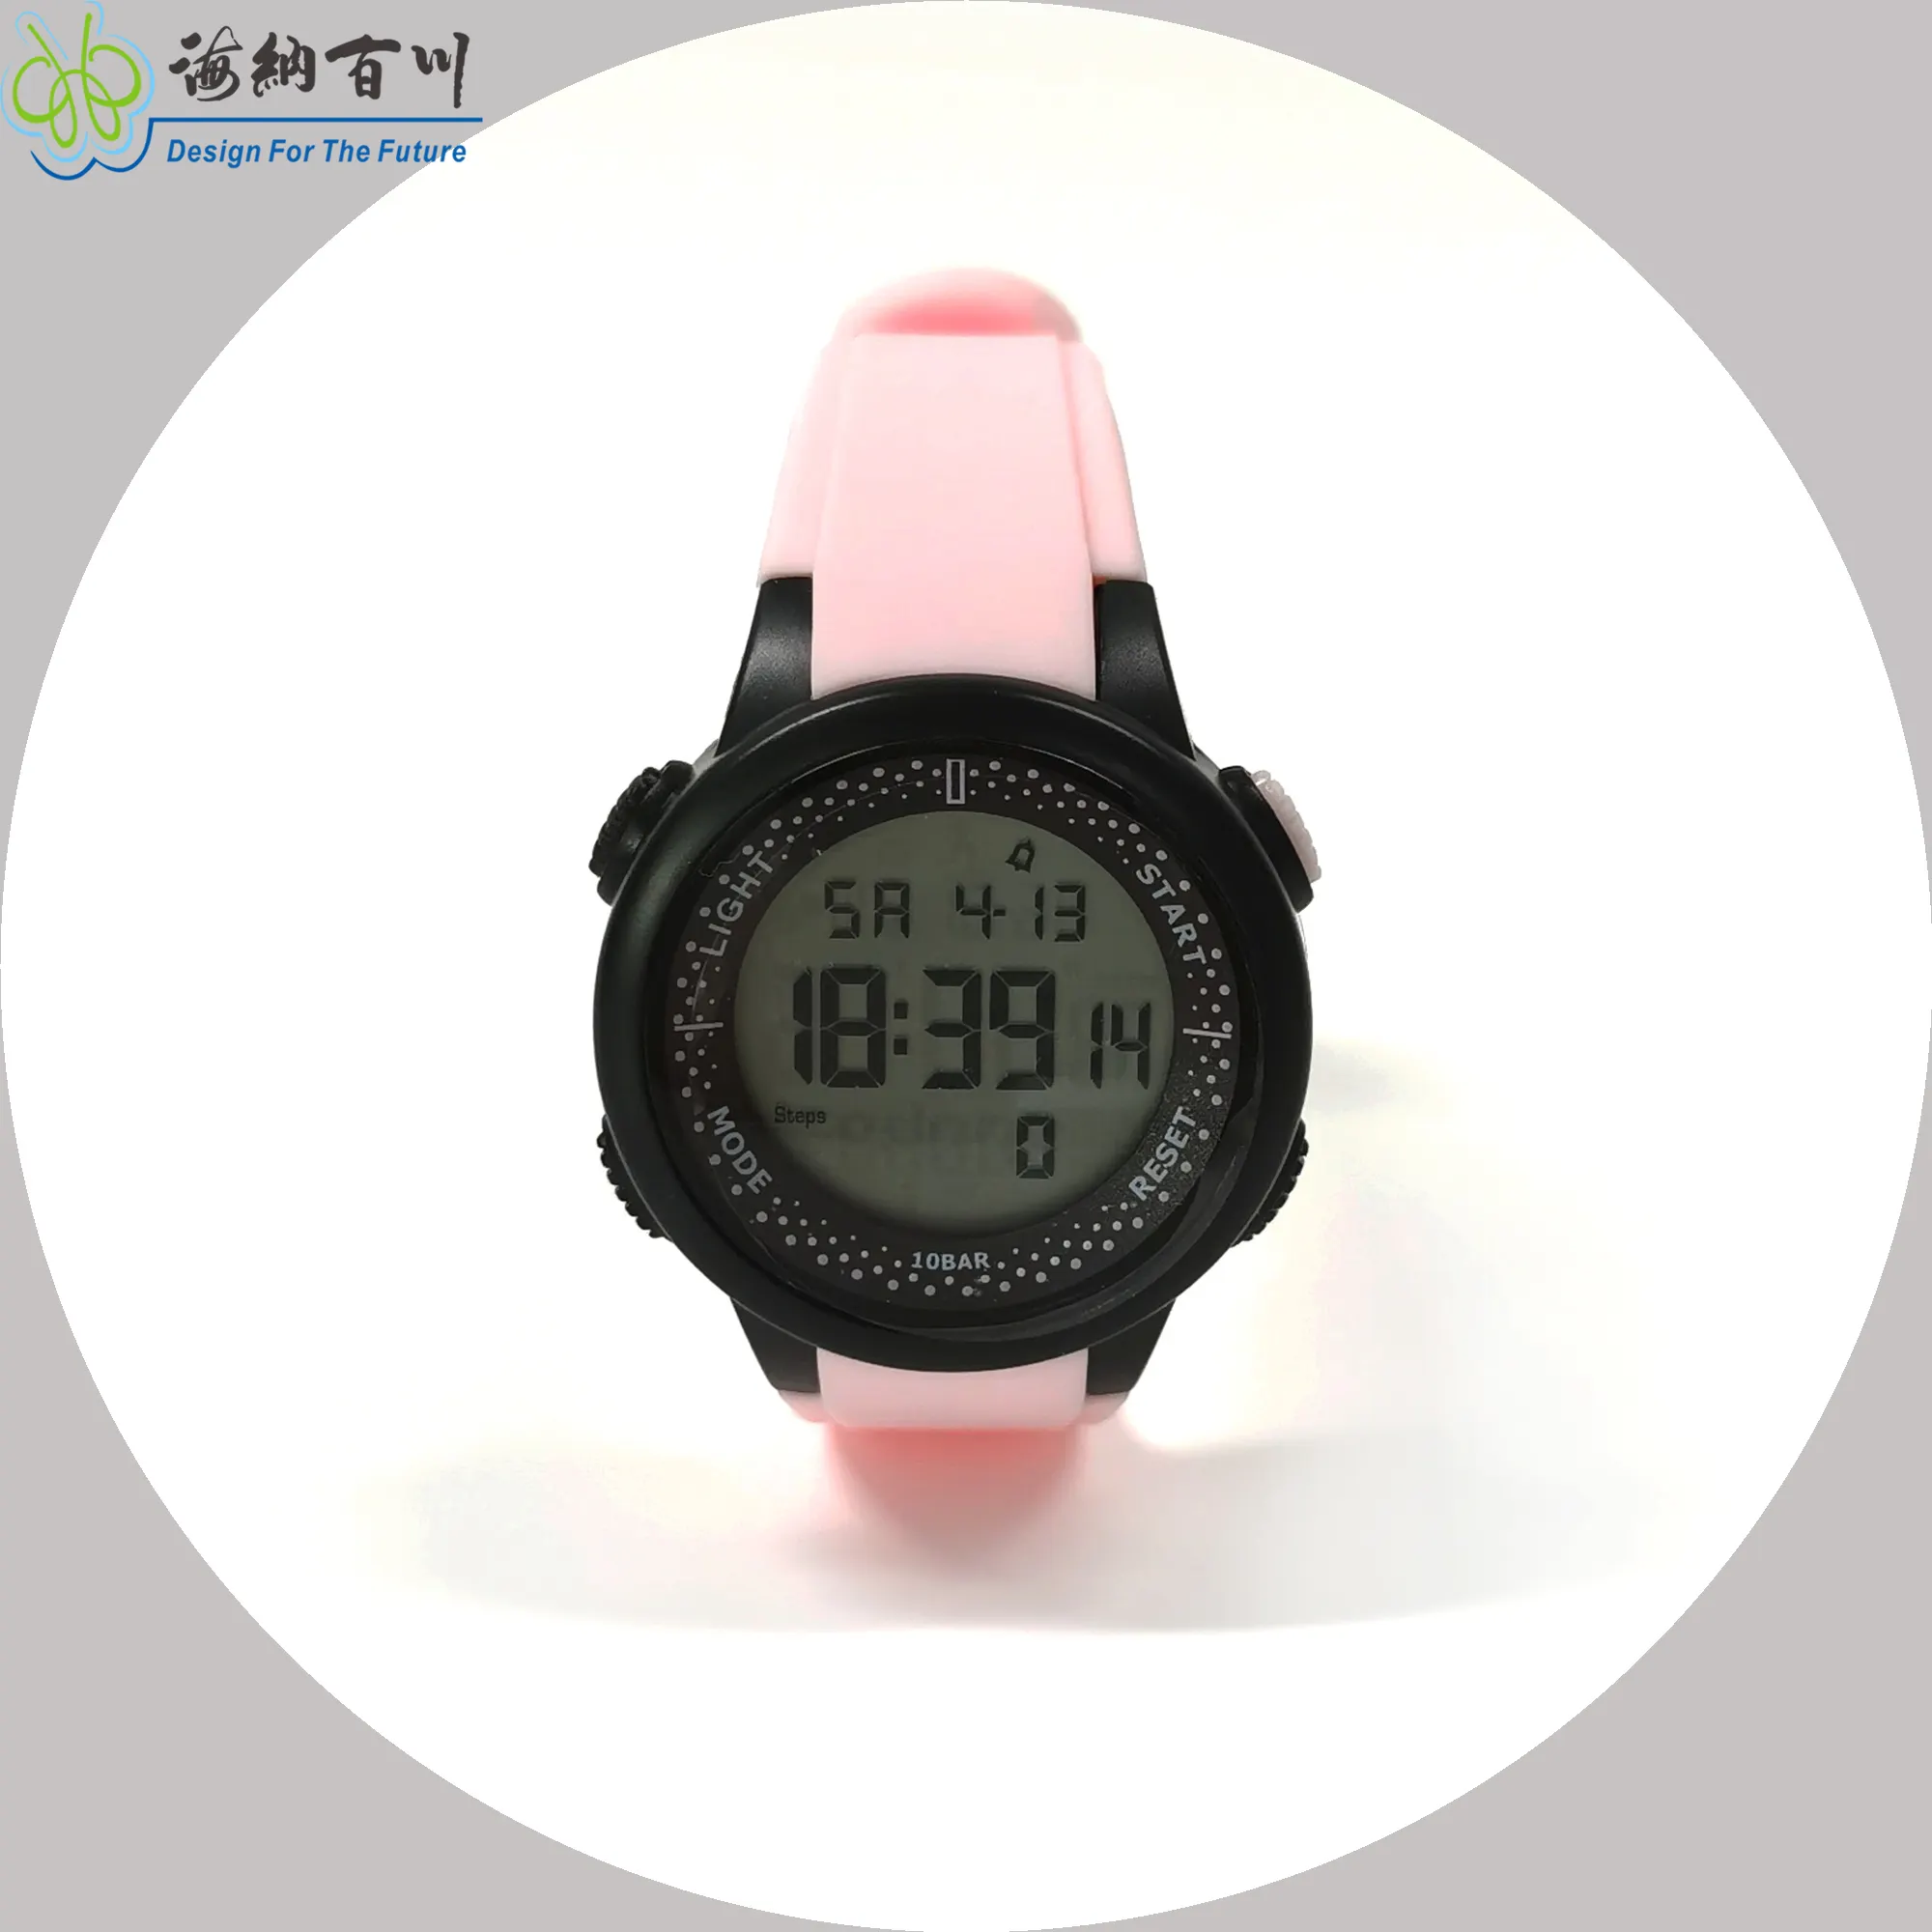 lady chronograph Digital China Auto Date LED Display Complete Calendar sport Stop Watch Led Watch Day/Date Rubber Wrist watch